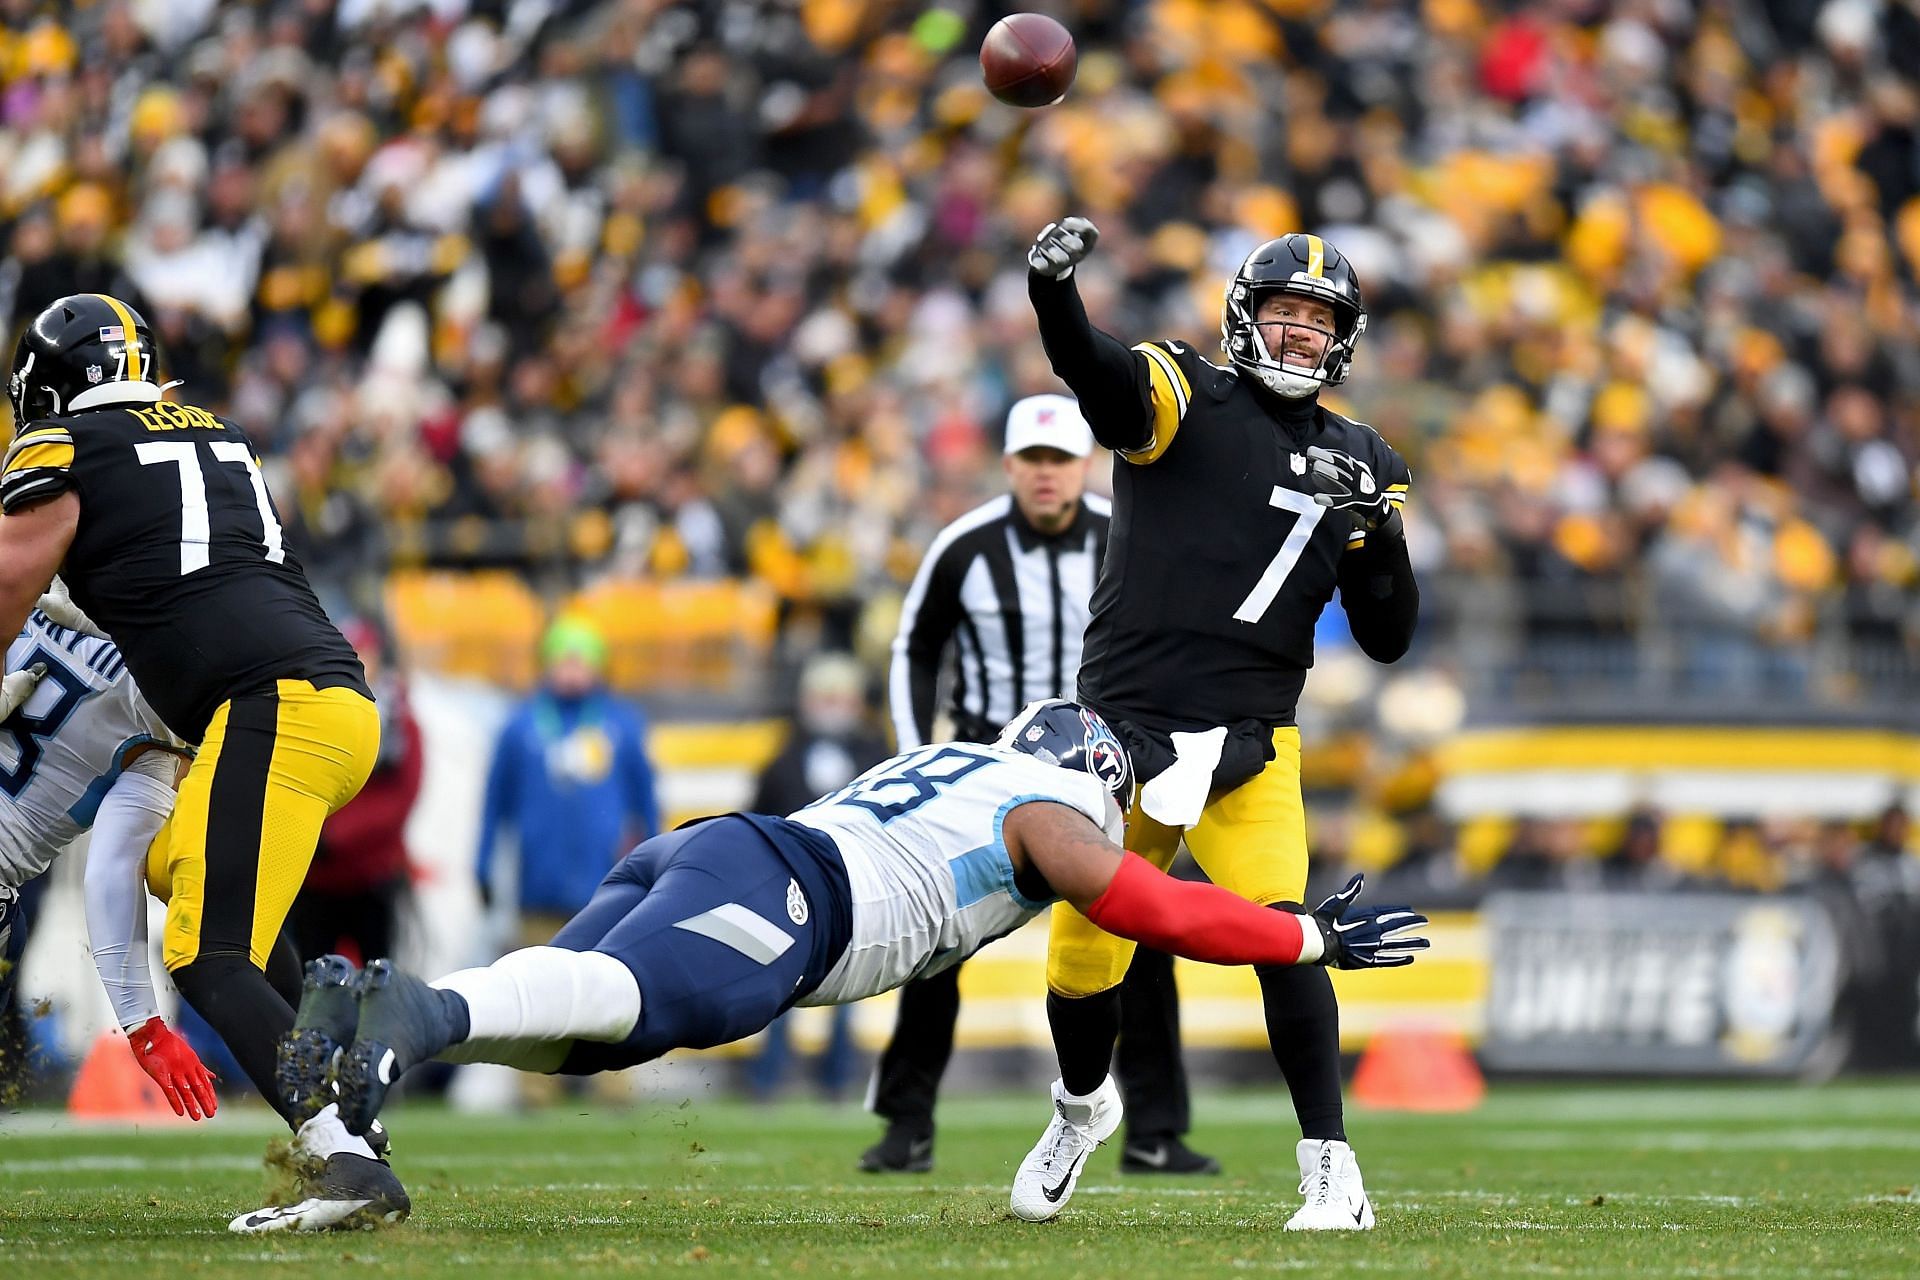 A low and late hit on former Steelers QB Ben Roethlisberger